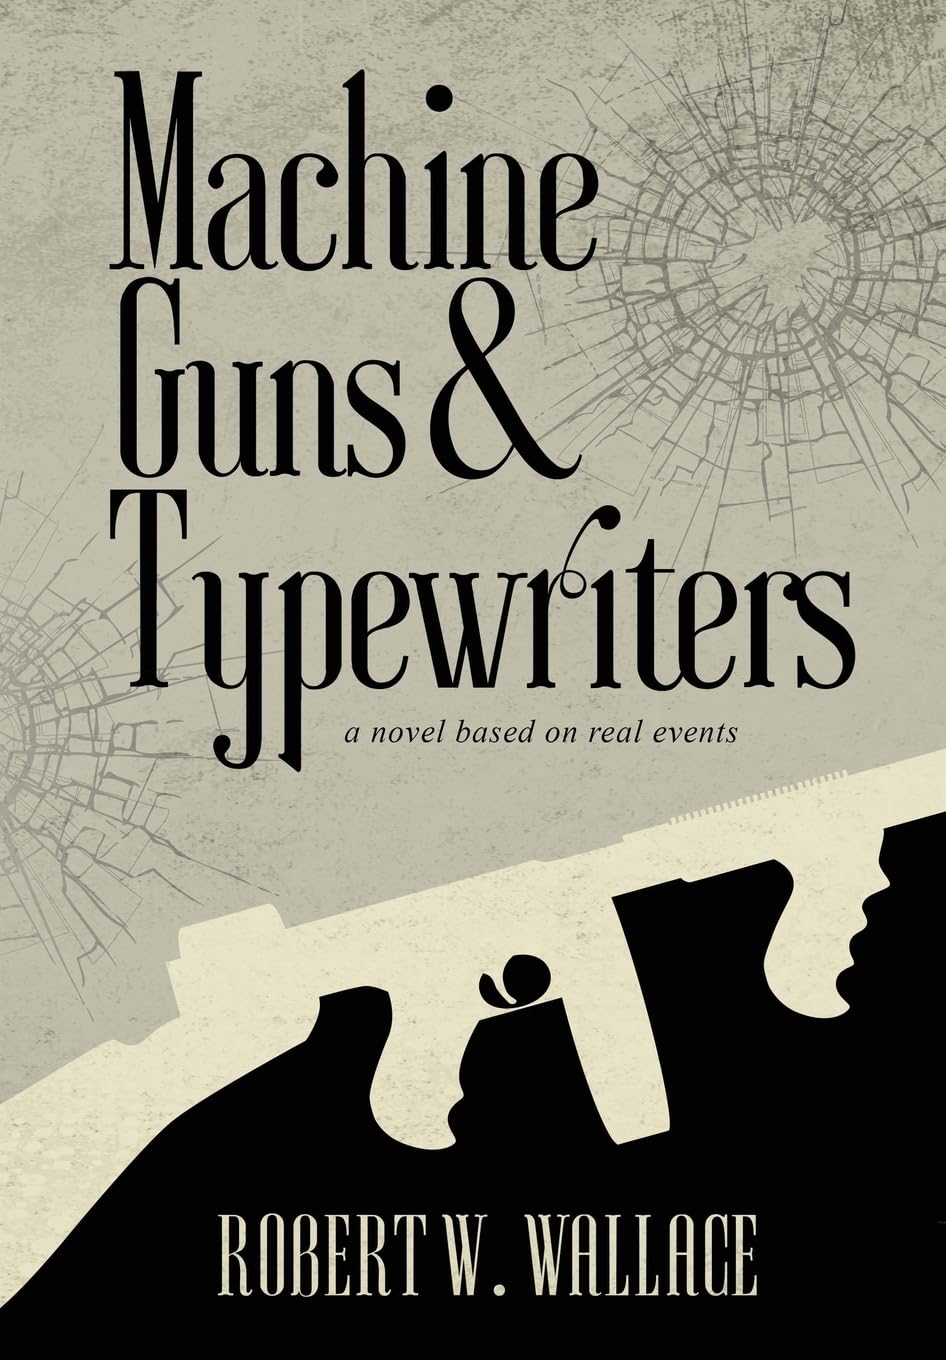 New novel "Machine Guns & Typewriters" by Robert W. Wallace is released, a thriller based on real events about callous gangsters, brazen murder, and sensational robbery in 1930s Massachusetts